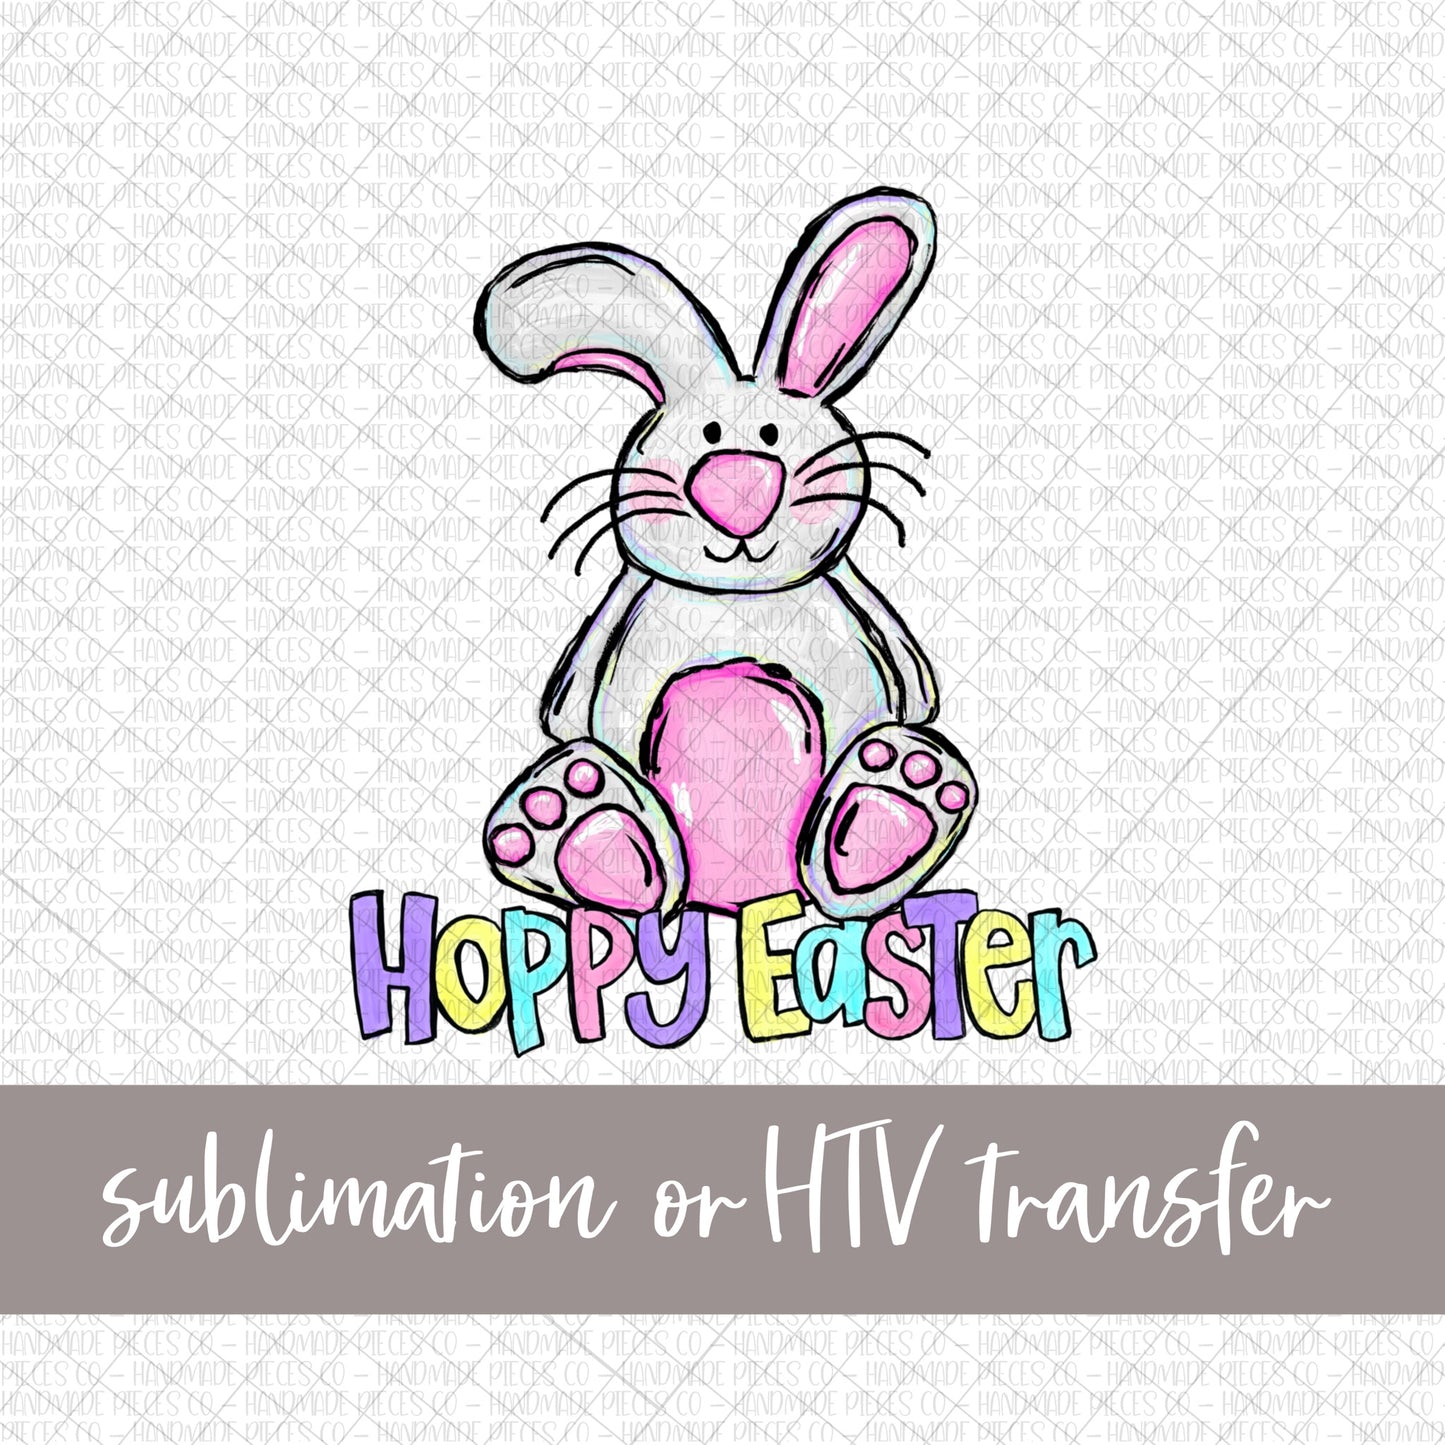 Bunny Pink, Hoppy Easter - Sublimation or HTV Transfer